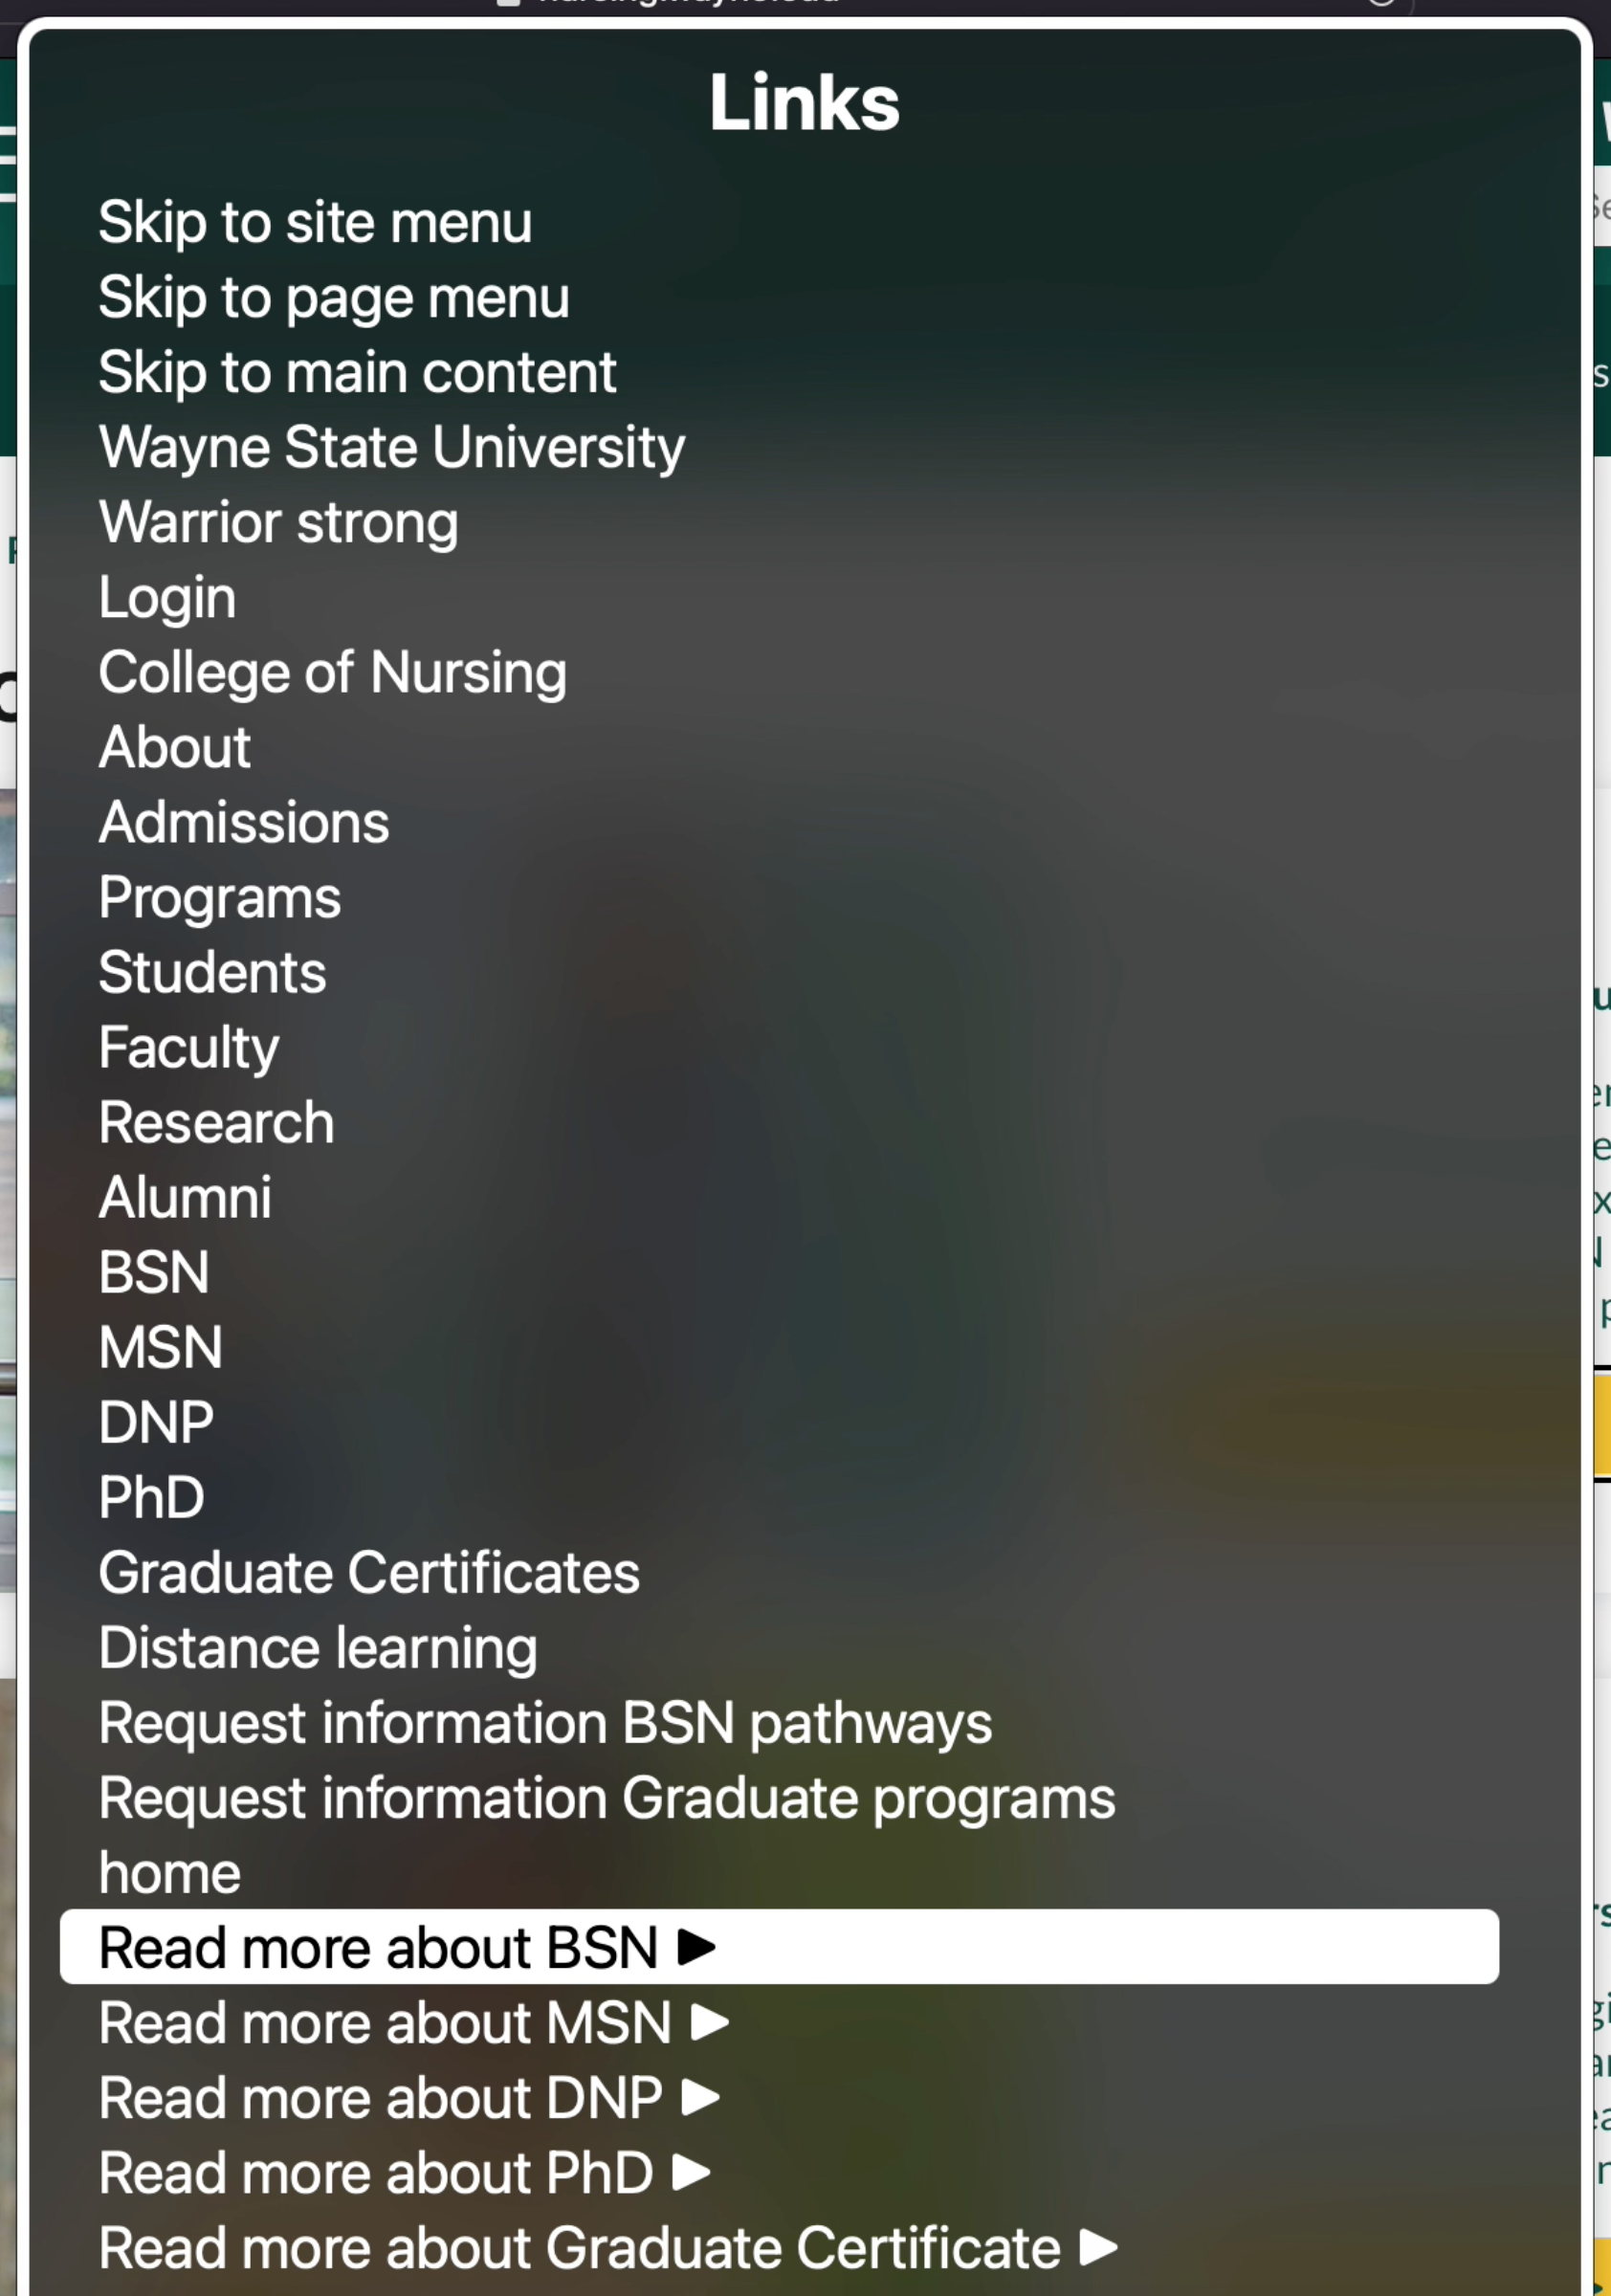 Screenshot of links on the nursing homepage pulled up by a screen reader